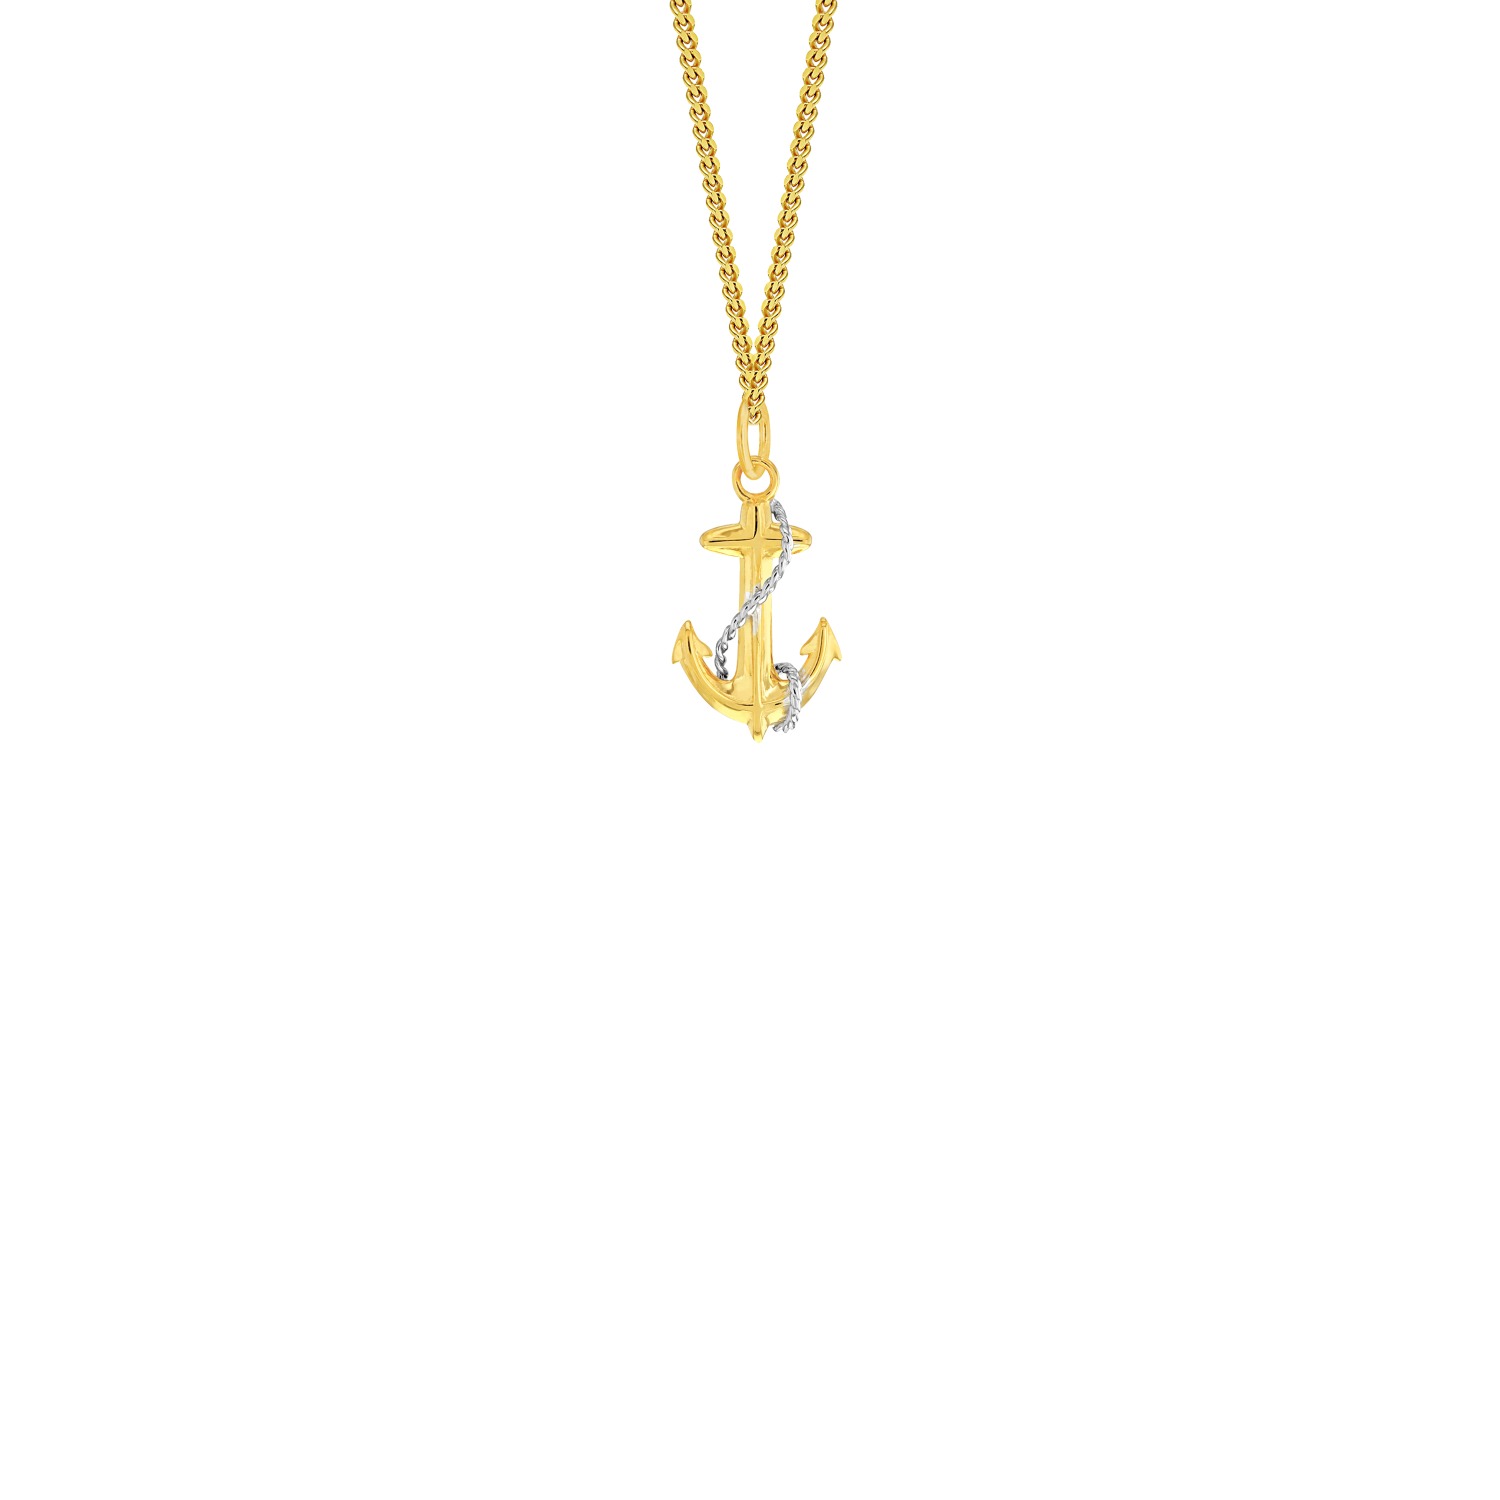 Men's Mini Anchor Pendant 18Kt Gold-Plated With Sterling Silver Detail True Rocks